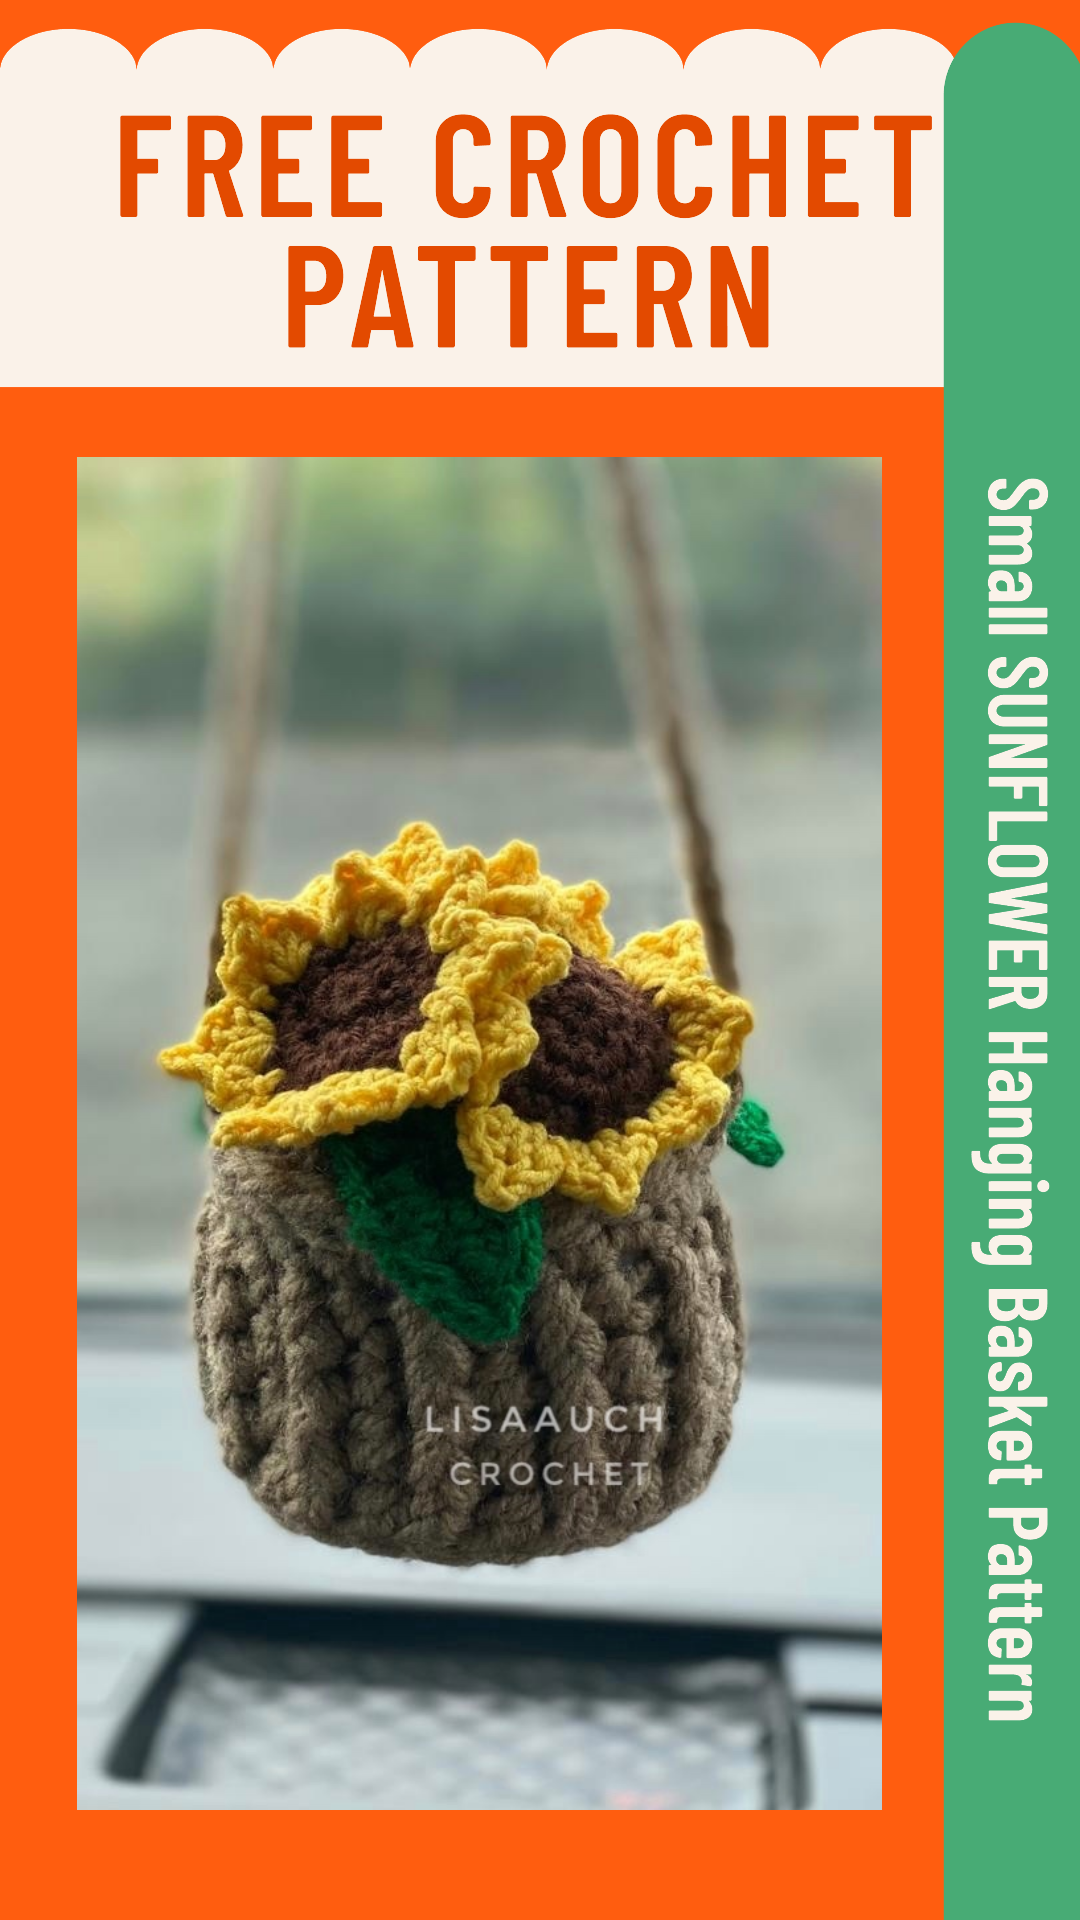 Small Crochet Sunflower Hanging Basket Pattern - Crochet your own car accessory! Easy Crochet Project that is FREE, Easy, and Fun to crochet.